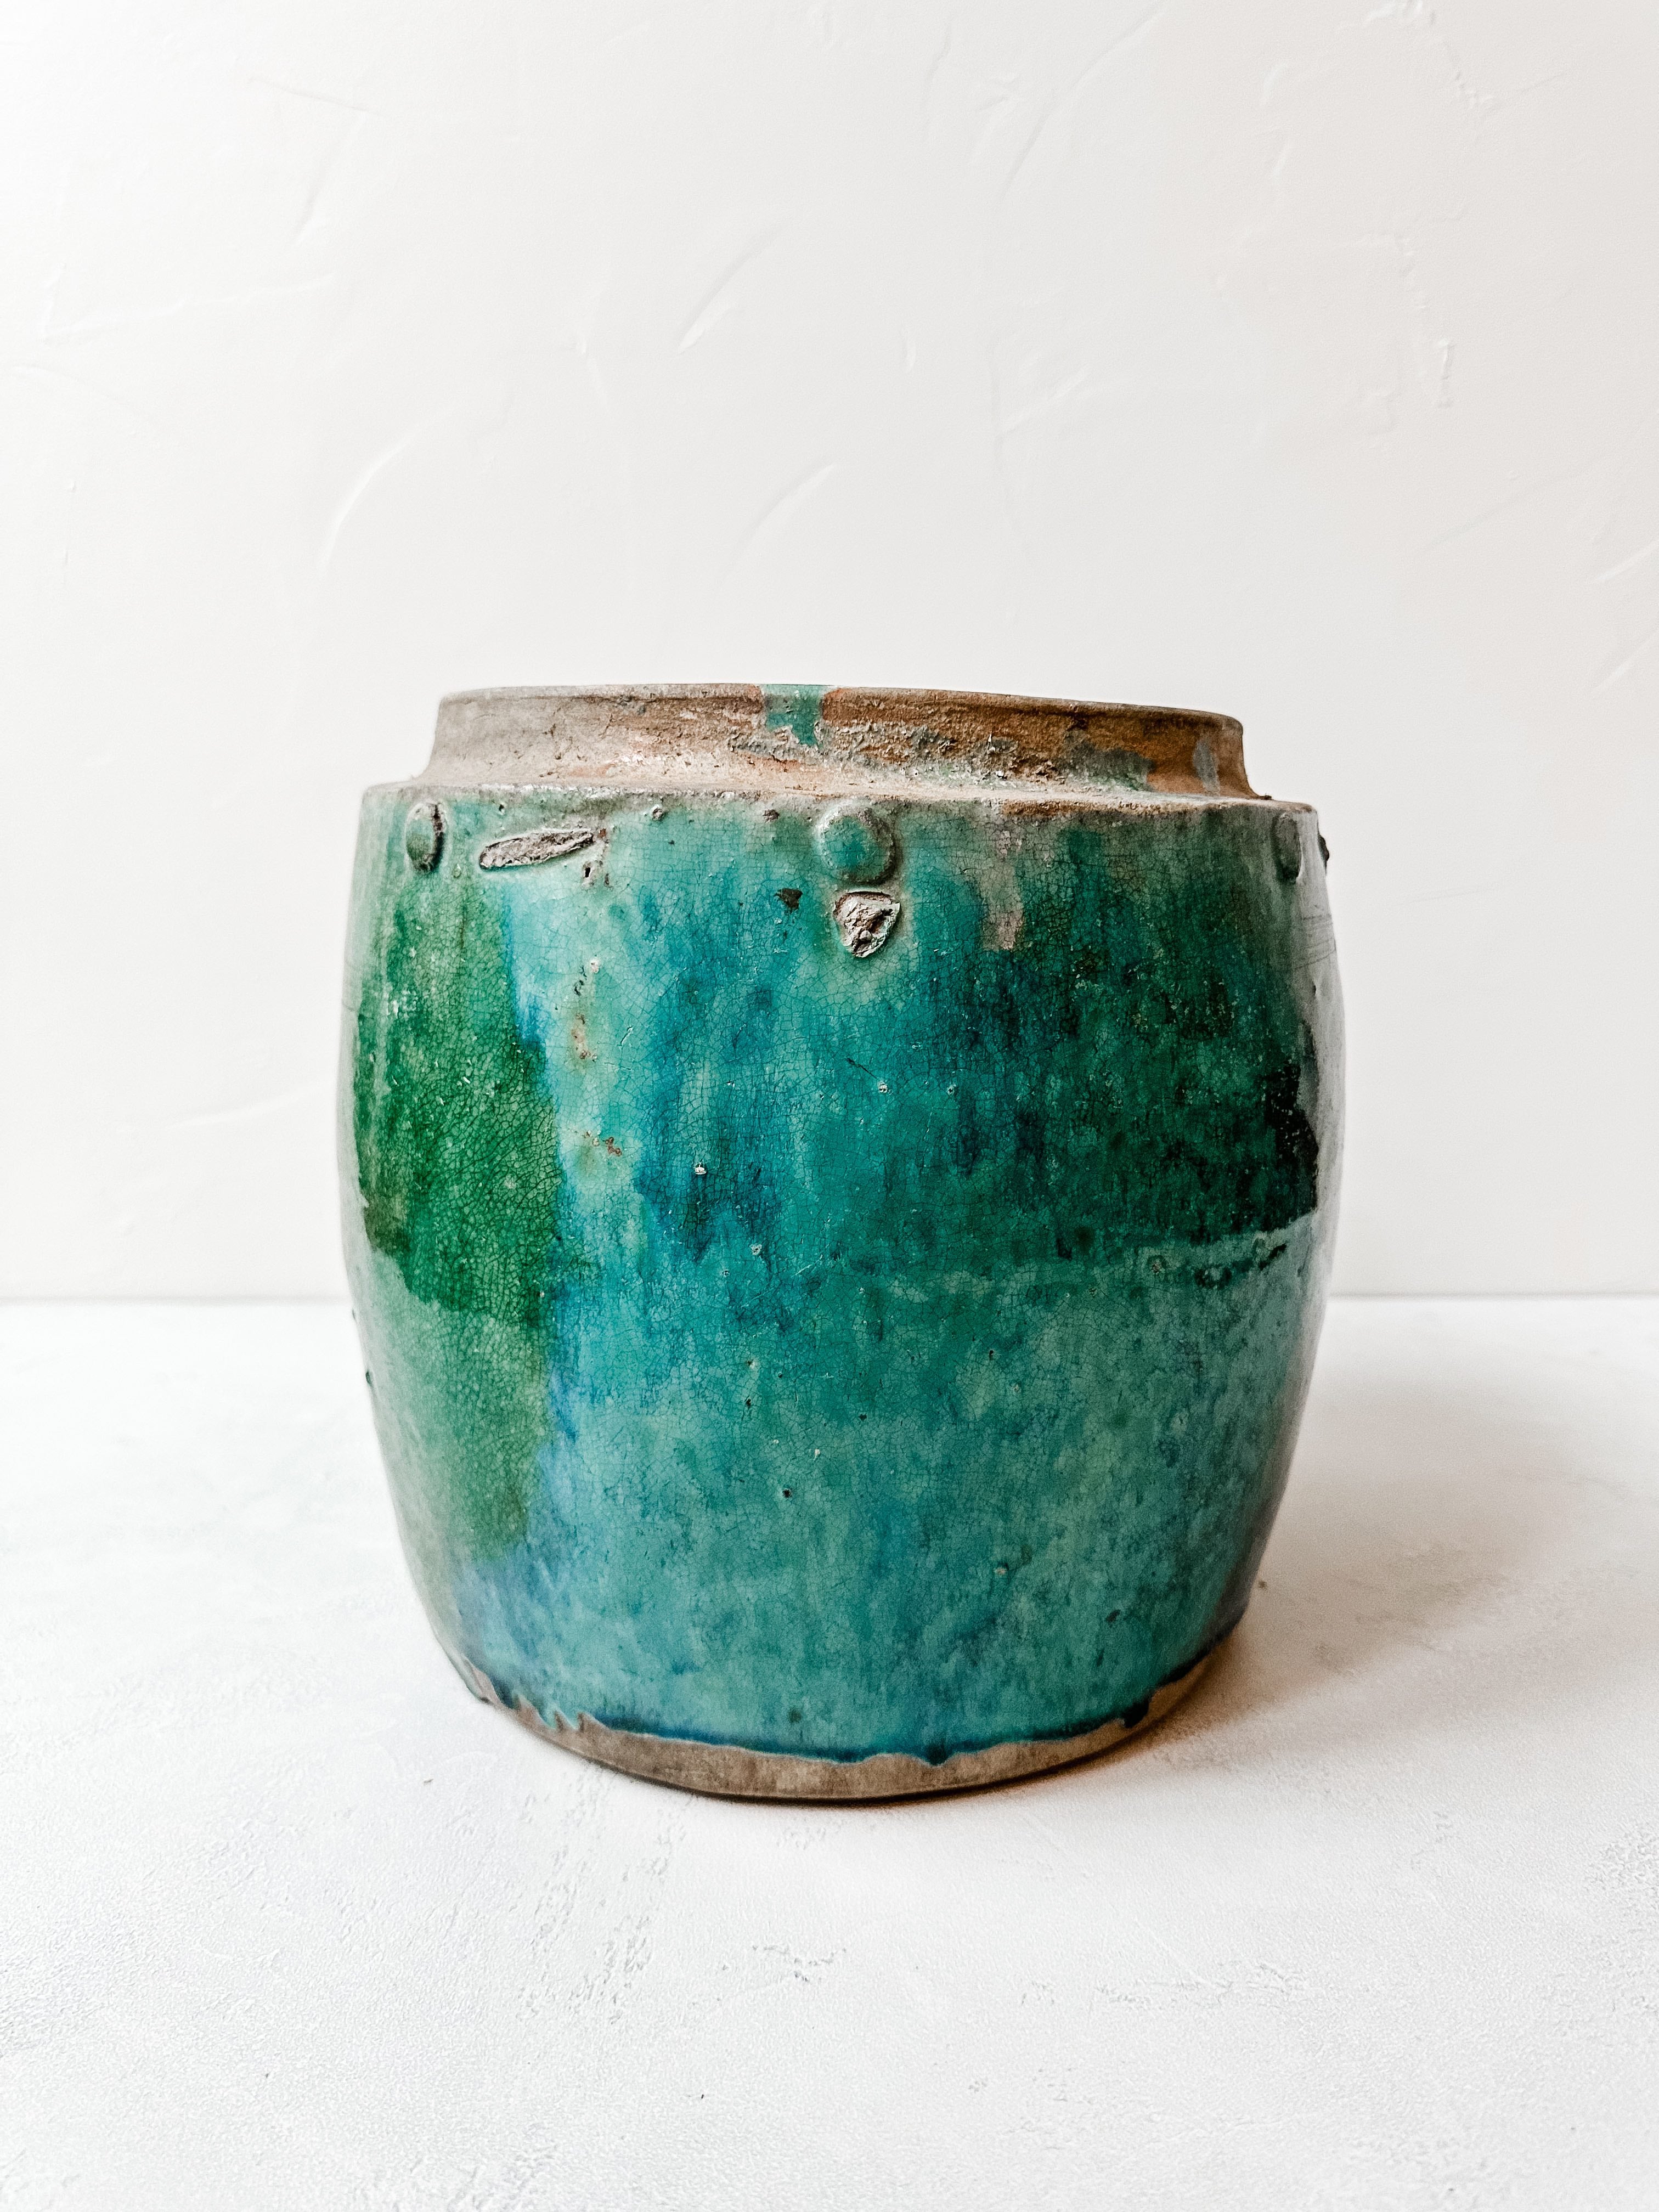 The antique ginger pot turquoise